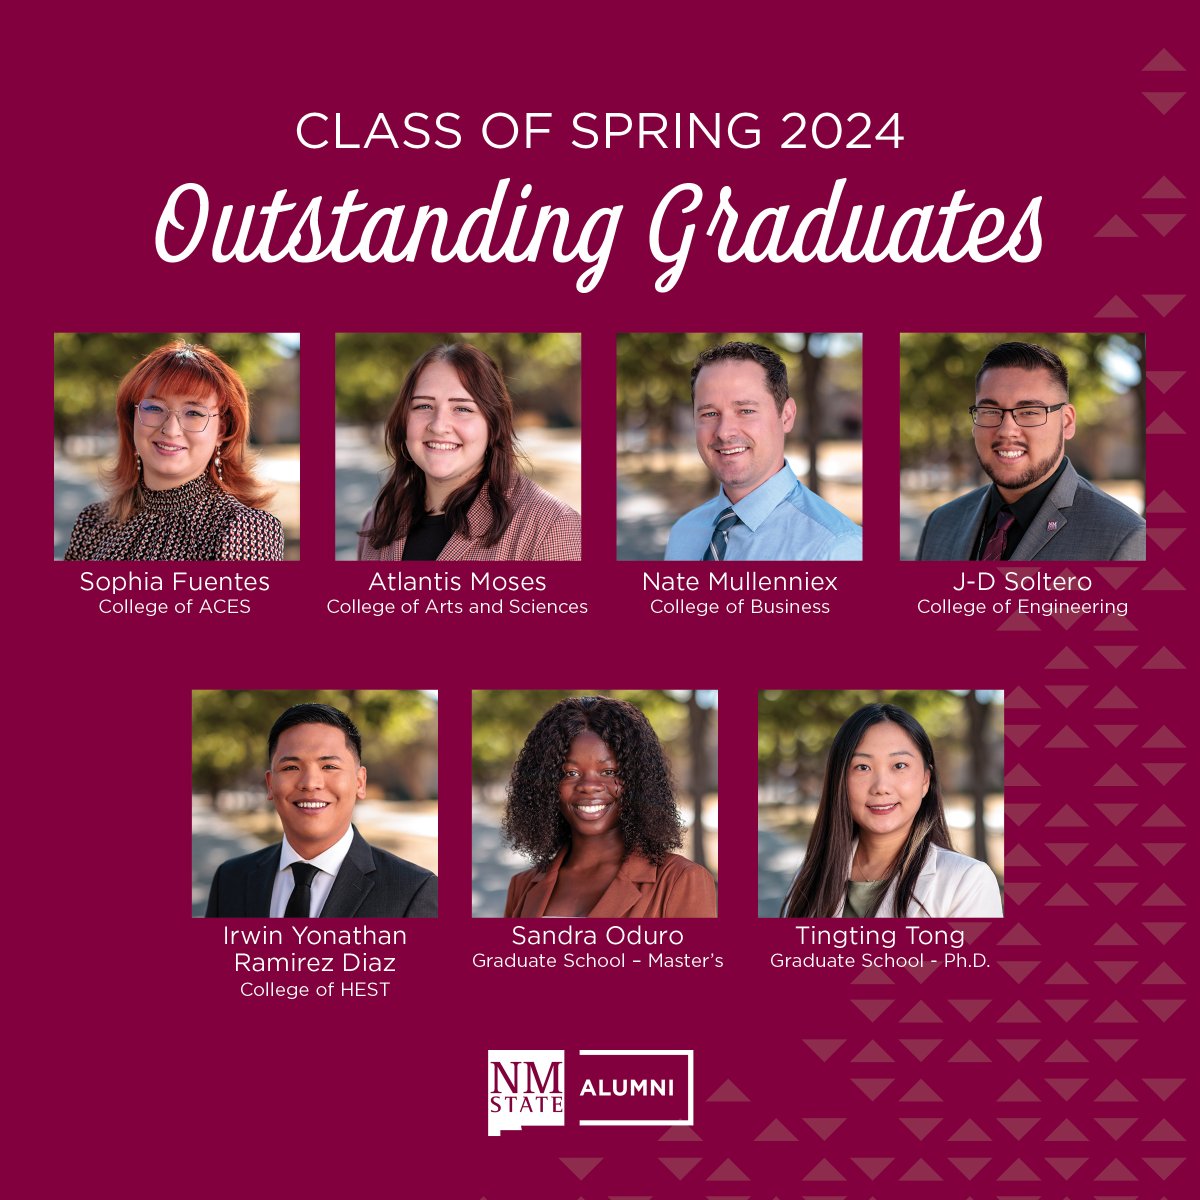 ✨ Introducing the New Mexico State University Alumni Association Outstanding Graduates for Spring 2024! Learn more about this year’s honorees: nmsufoundation.org/in-the-news-ou…

#NMSU #NMSUAlumni #AlwaysAnAggie #OutstandingGraduate